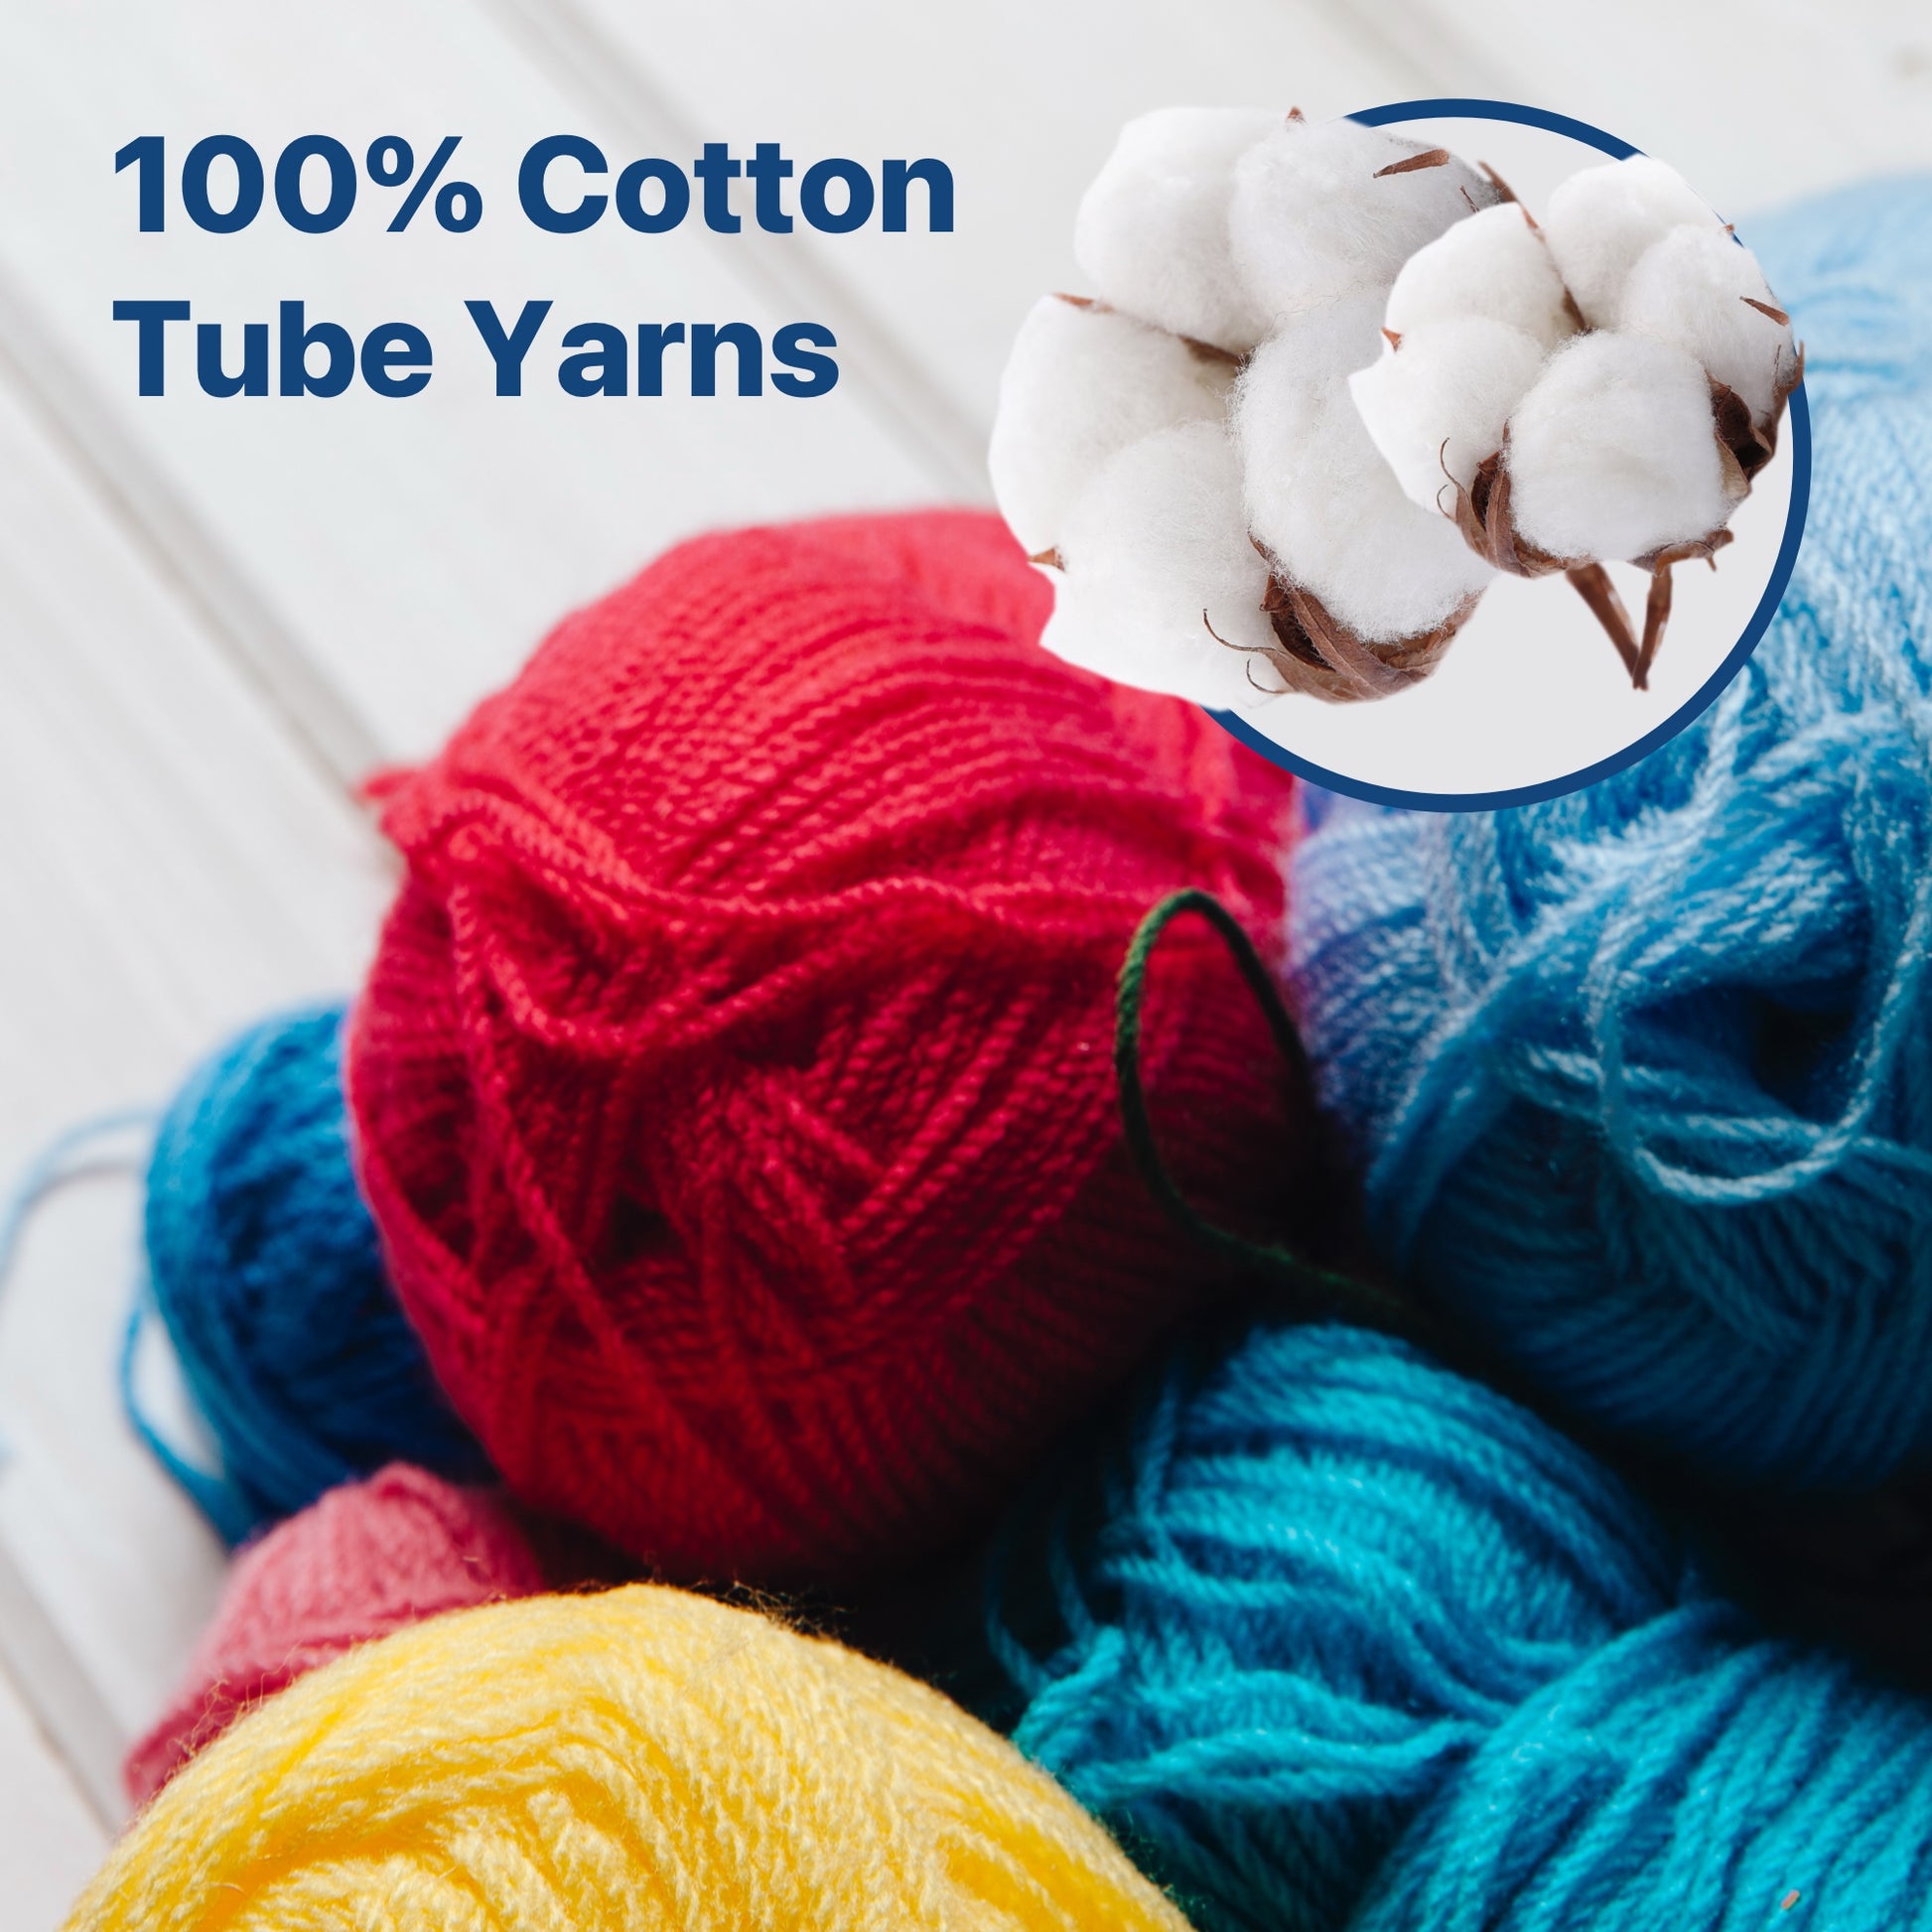 Tube yarn and Cord Yarn made of 100% cotton - LaPace Living